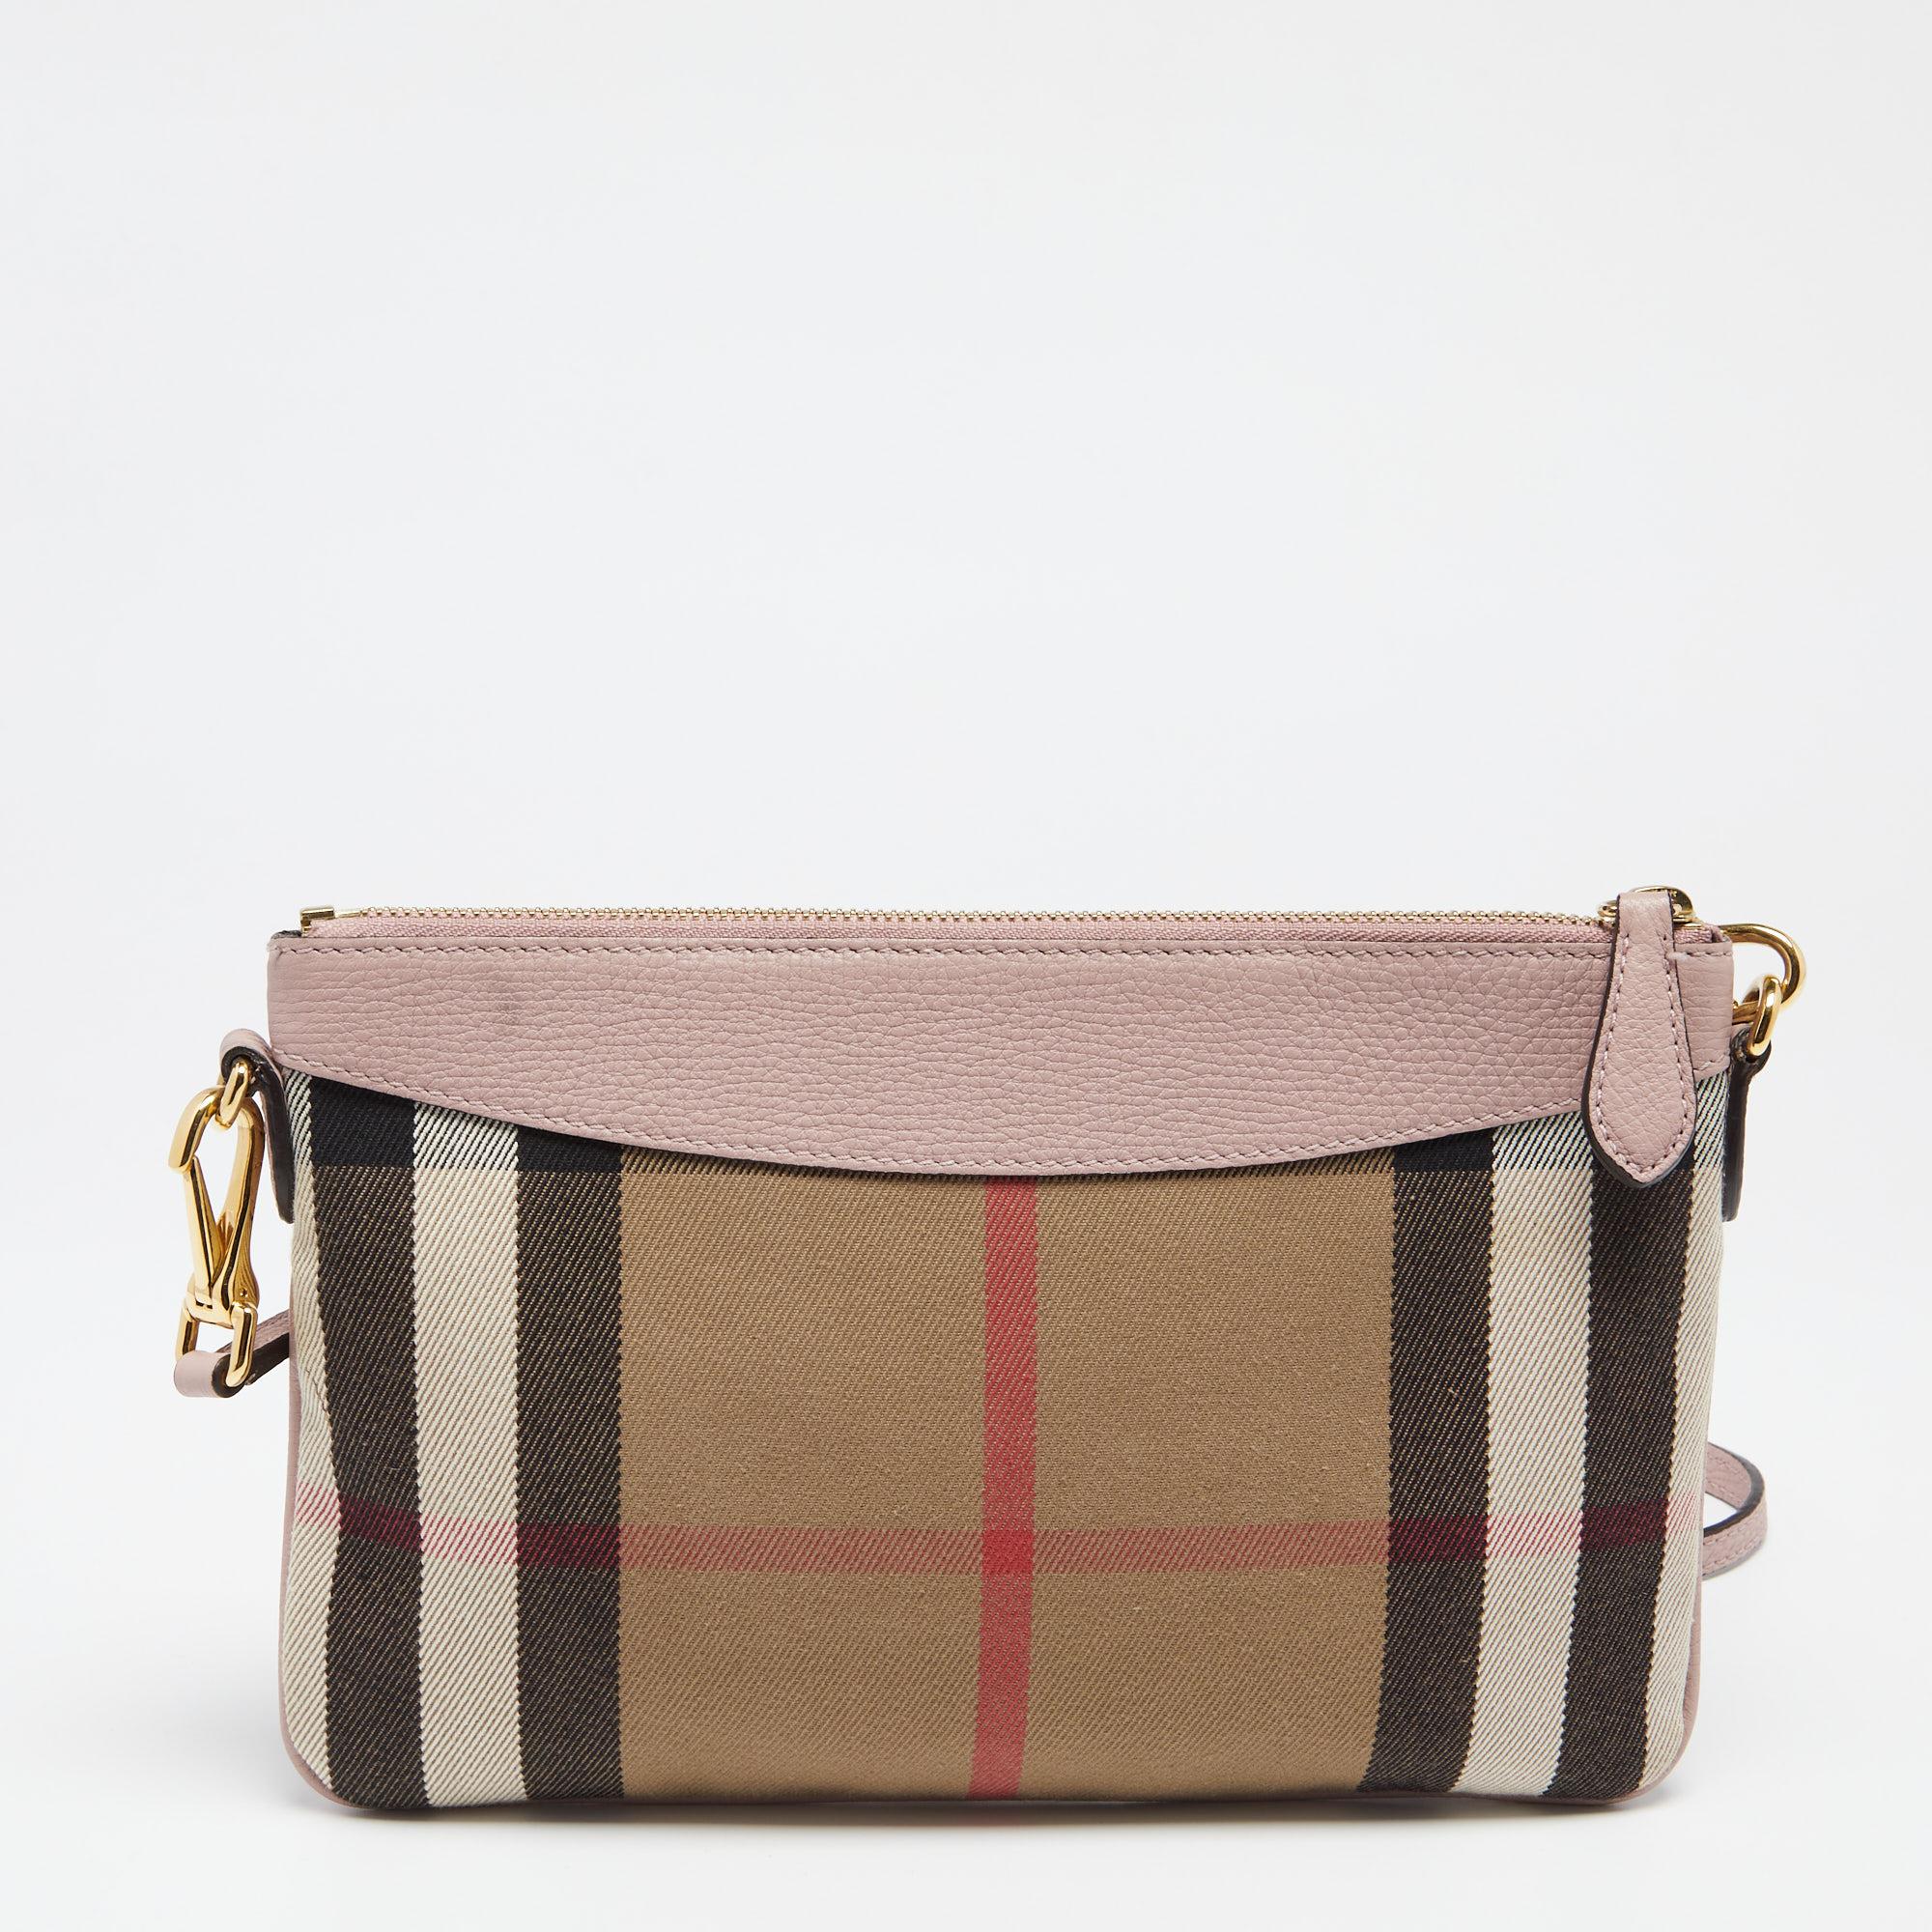 Crafted from signature canvas with leather trims, this Burberry Peyton bag is a valuable and reliable accessory. It features the brand signature on the front, gold-tone hardware, and a shoulder strap. Lined with canvas, the interior is spacious